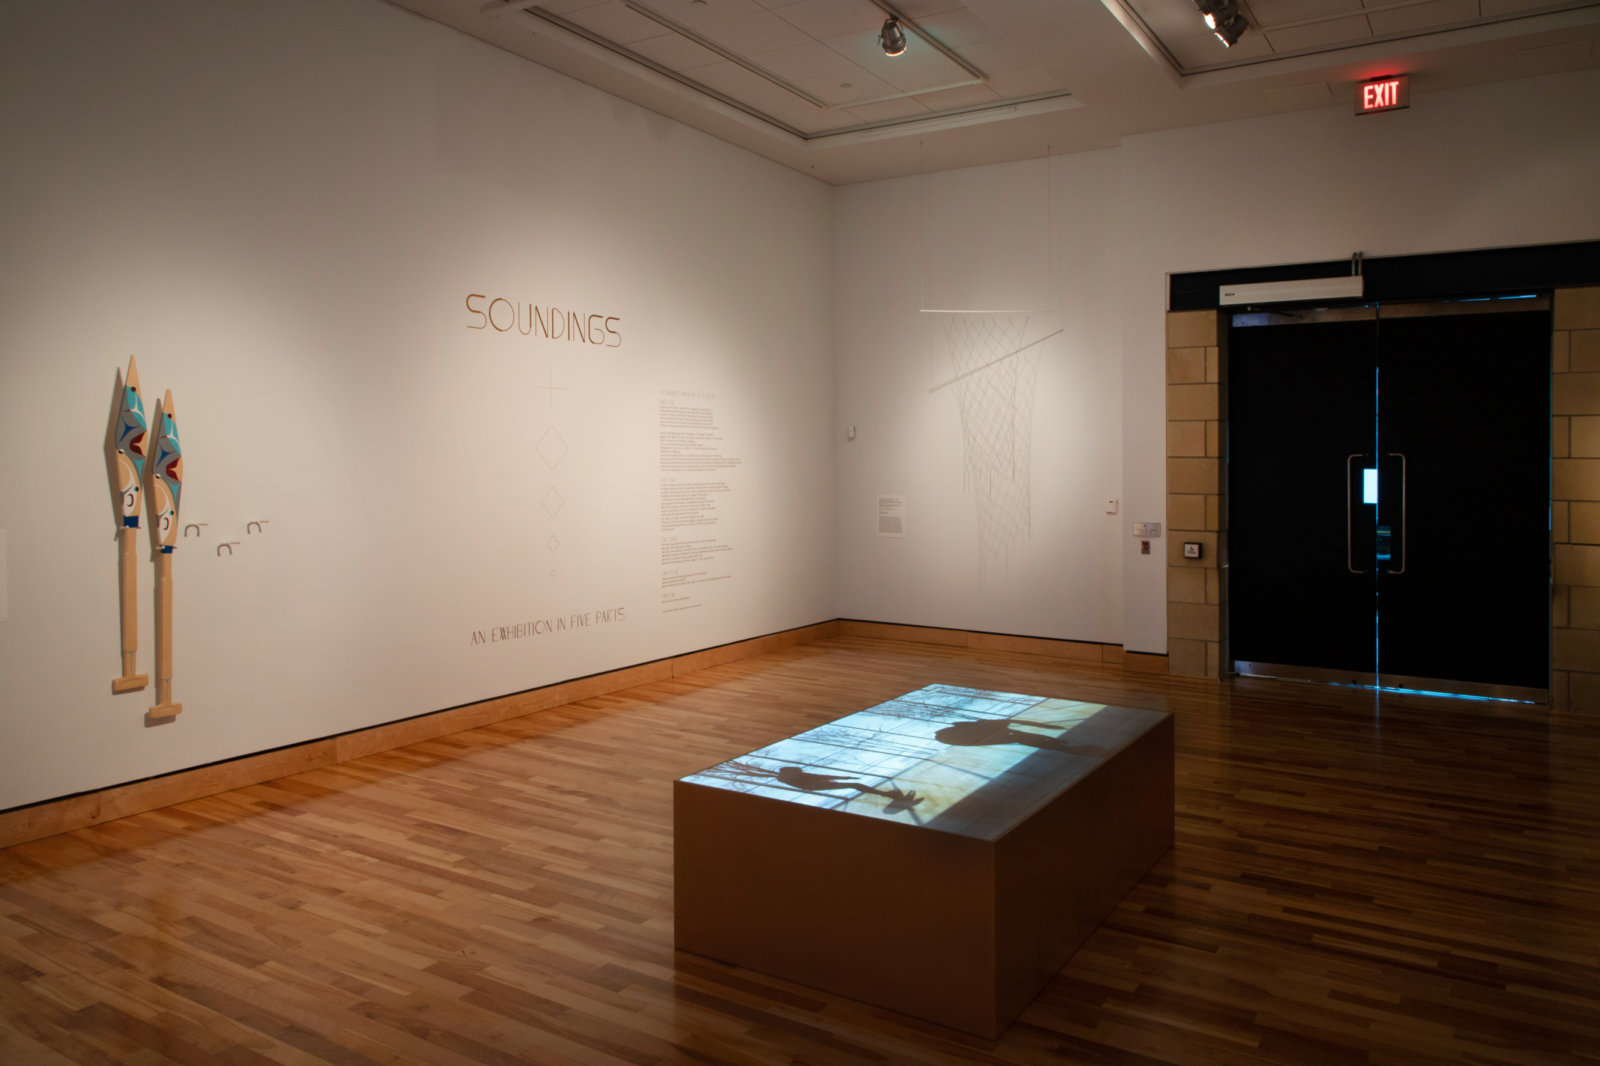 Tanya Lukin Linklater, We wear one another, 2019⁠, site-specific performance projected on wood plinth, 48 x 24 x 85 in. (122 x 61 x 216 cm), 25 minutes, 18 seconds. Installation view, Soundings, The Rooms, St. John's, Canada, 2022